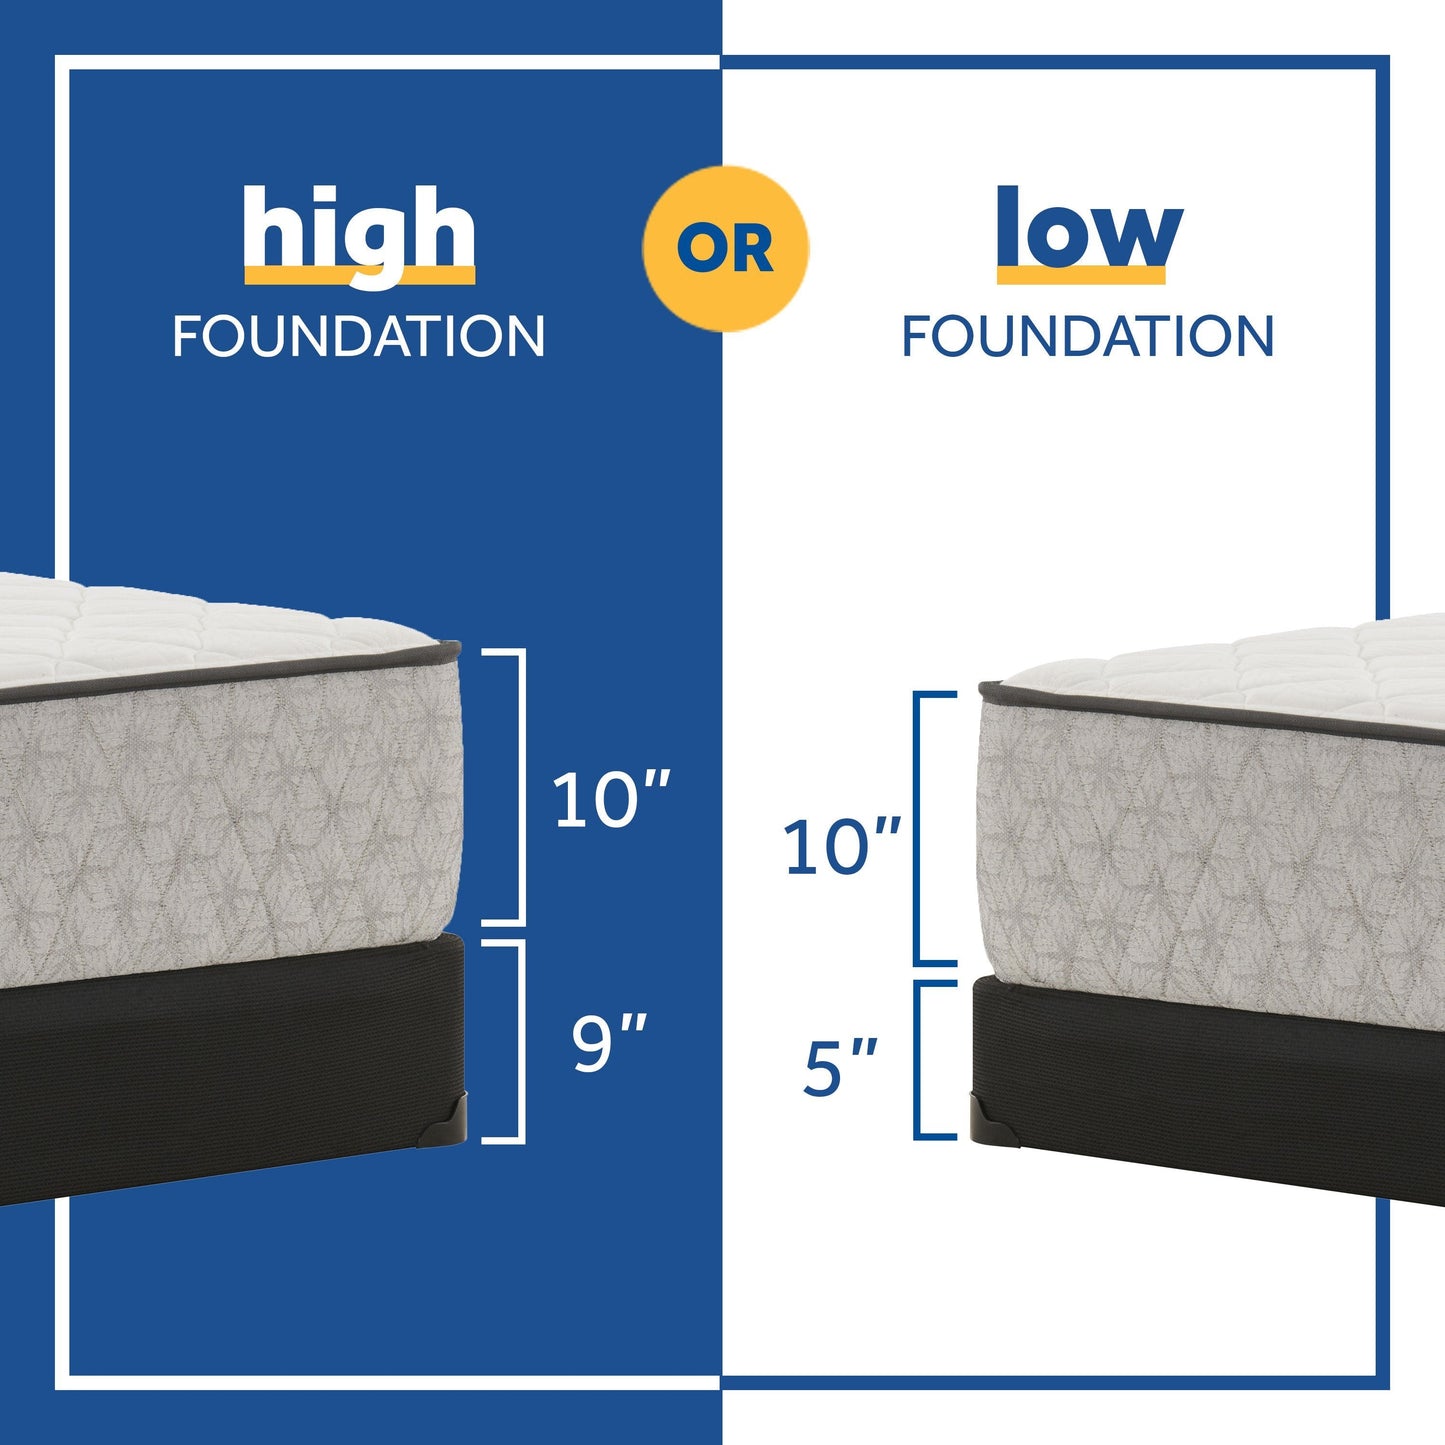 Sealy Belvoire Firm Mattress Foundation Guide